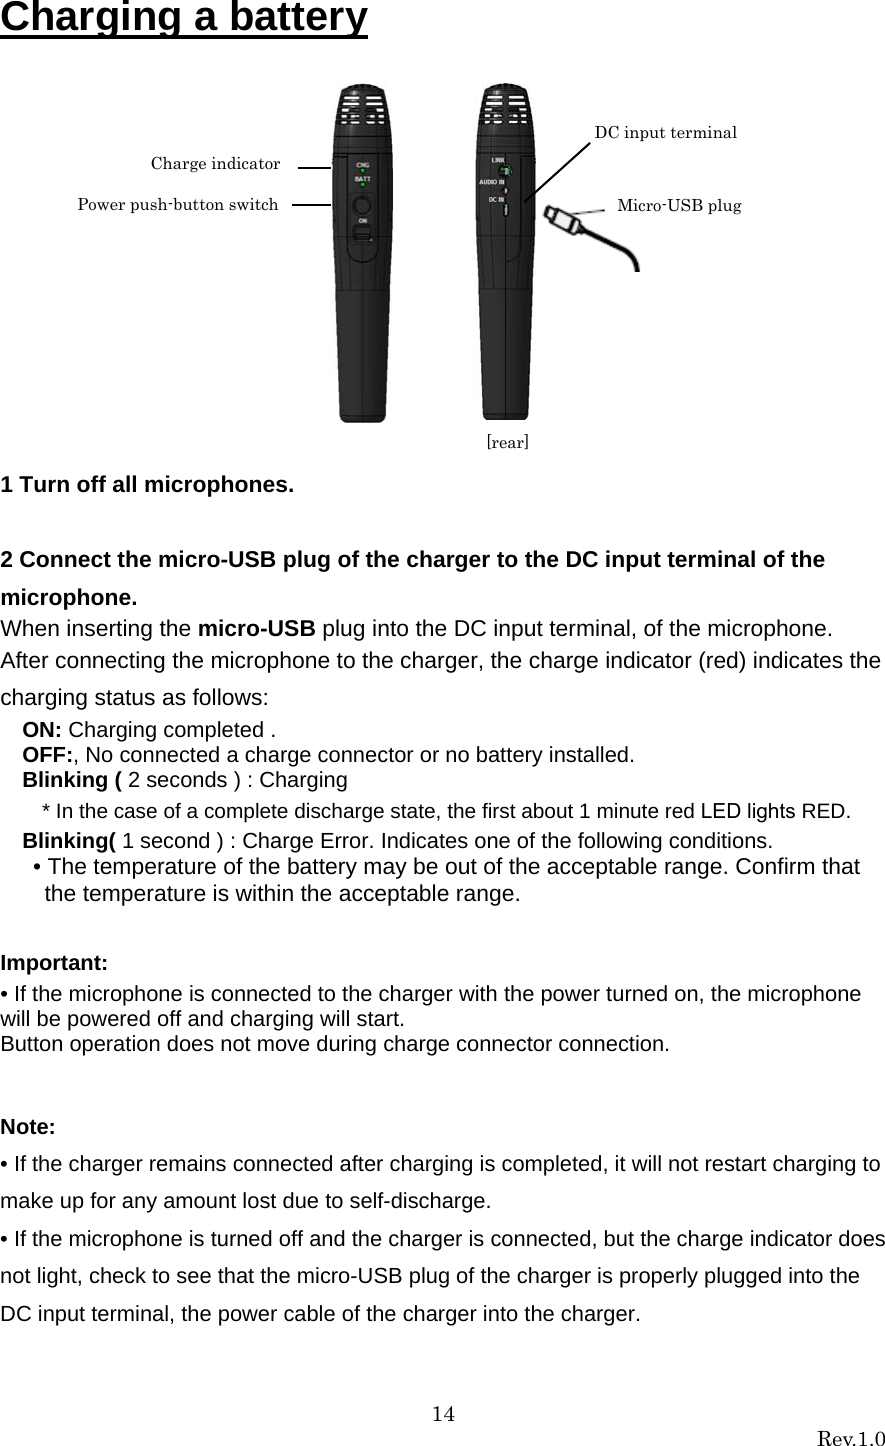 14 Rev.1.0  Charging a battery            1 Turn off all microphones.  2 Connect the micro-USB plug of the charger to the DC input terminal of the microphone. When inserting the micro-USB plug into the DC input terminal, of the microphone. After connecting the microphone to the charger, the charge indicator (red) indicates the charging status as follows: ON: Charging completed . OFF:, No connected a charge connector or no battery installed. Blinking ( 2 seconds ) : Charging  * In the case of a complete discharge state, the first about 1 minute red LED lights RED. Blinking( 1 second ) : Charge Error. Indicates one of the following conditions. • The temperature of the battery may be out of the acceptable range. Confirm that the temperature is within the acceptable range.  Important: • If the microphone is connected to the charger with the power turned on, the microphone will be powered off and charging will start. Button operation does not move during charge connector connection.   Note: • If the charger remains connected after charging is completed, it will not restart charging to make up for any amount lost due to self-discharge. • If the microphone is turned off and the charger is connected, but the charge indicator does not light, check to see that the micro-USB plug of the charger is properly plugged into the DC input terminal, the power cable of the charger into the charger. Power push-button switch Charge indicator DC input terminal [rear] Micro-USB plug 